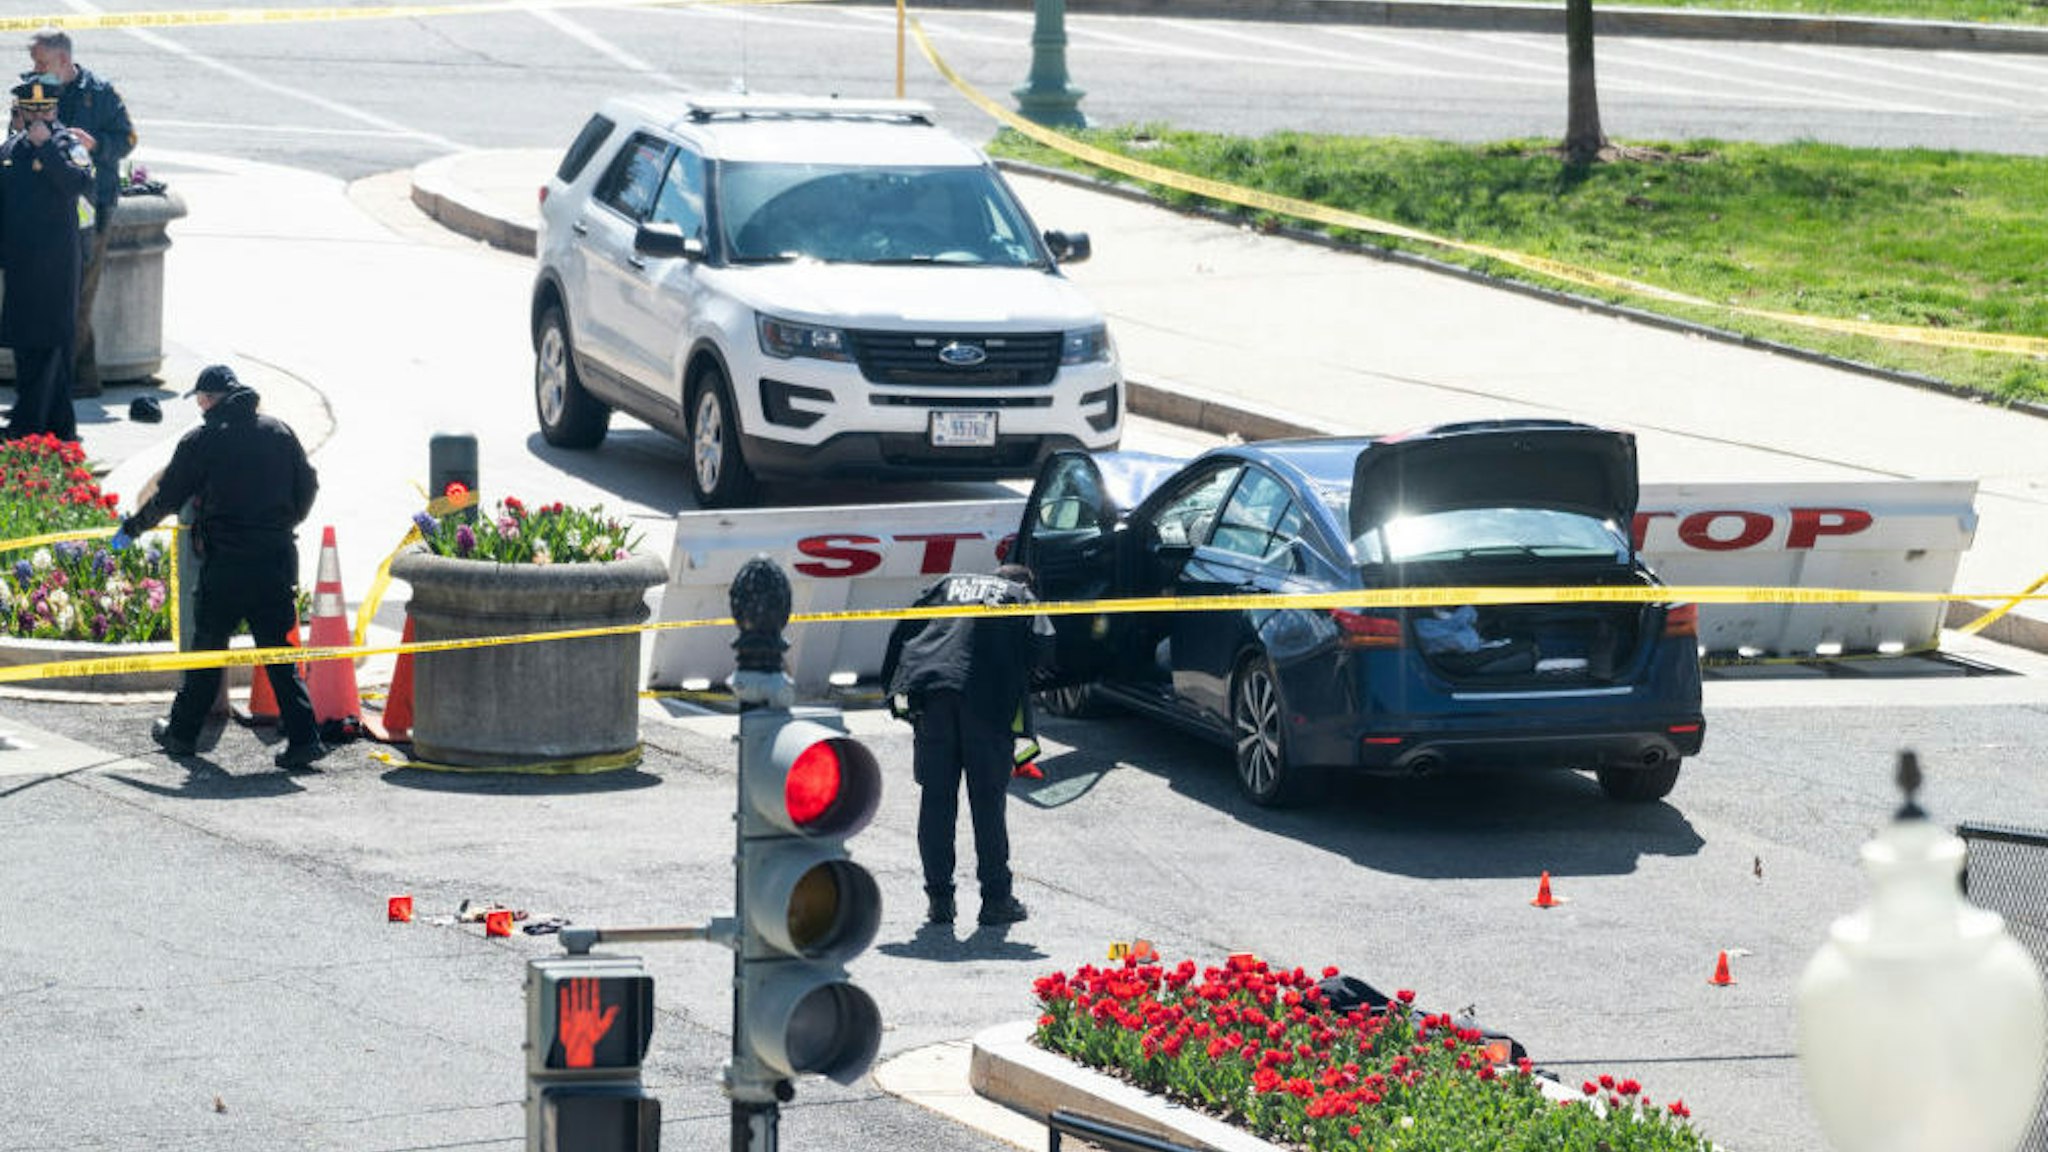 UNITED STATES - APRIL 2: Capitol Police investigate the scene after a vehicle drove into a security barrier near the U.S. Capitol building on Friday April 2, 2021. Two officers were reported injured with the driver of the vehicle fatally shot.